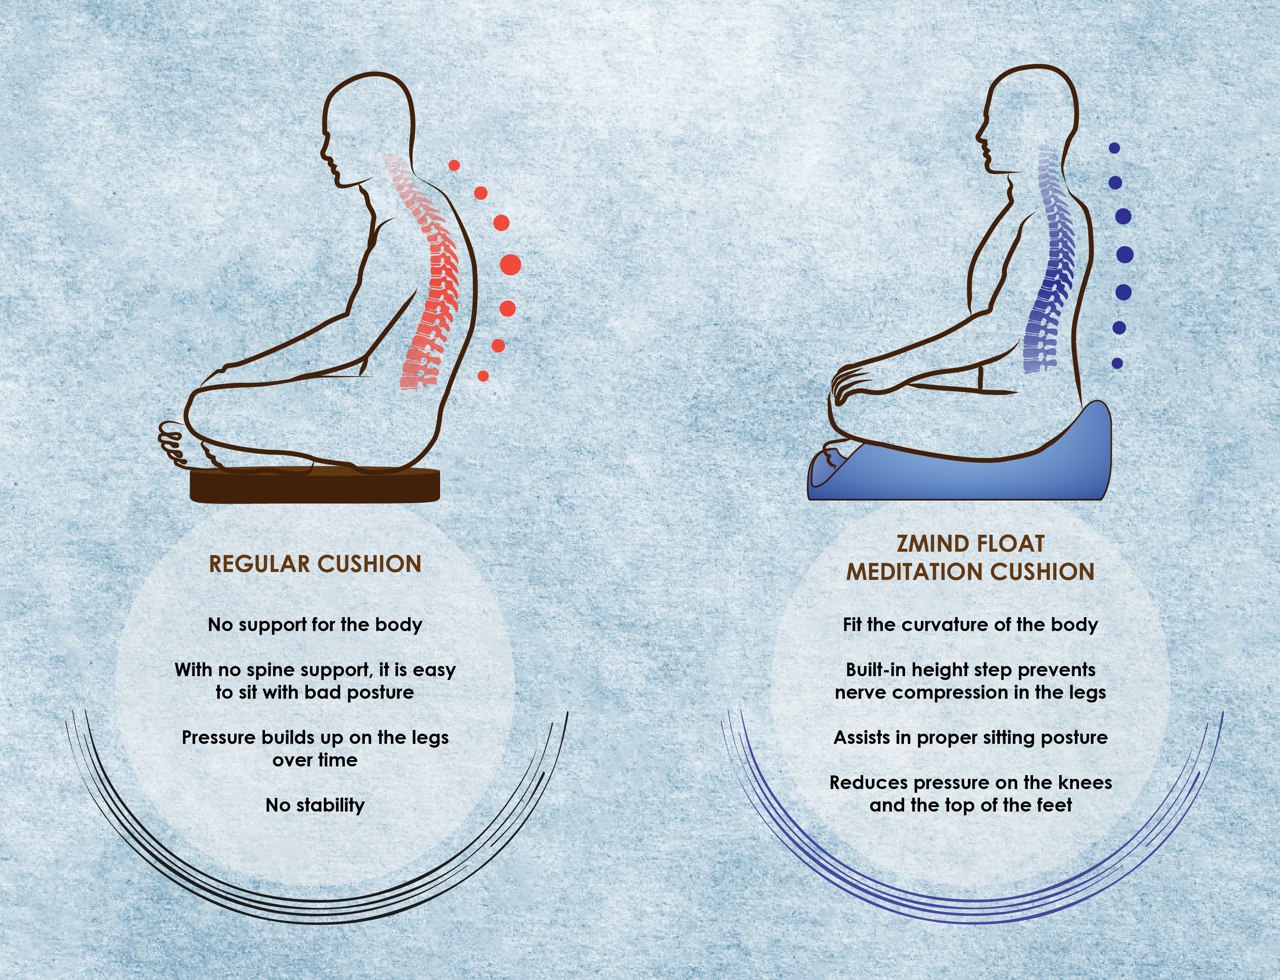 Try Komfort Cushion: Find out all the Benefits of a good Posture